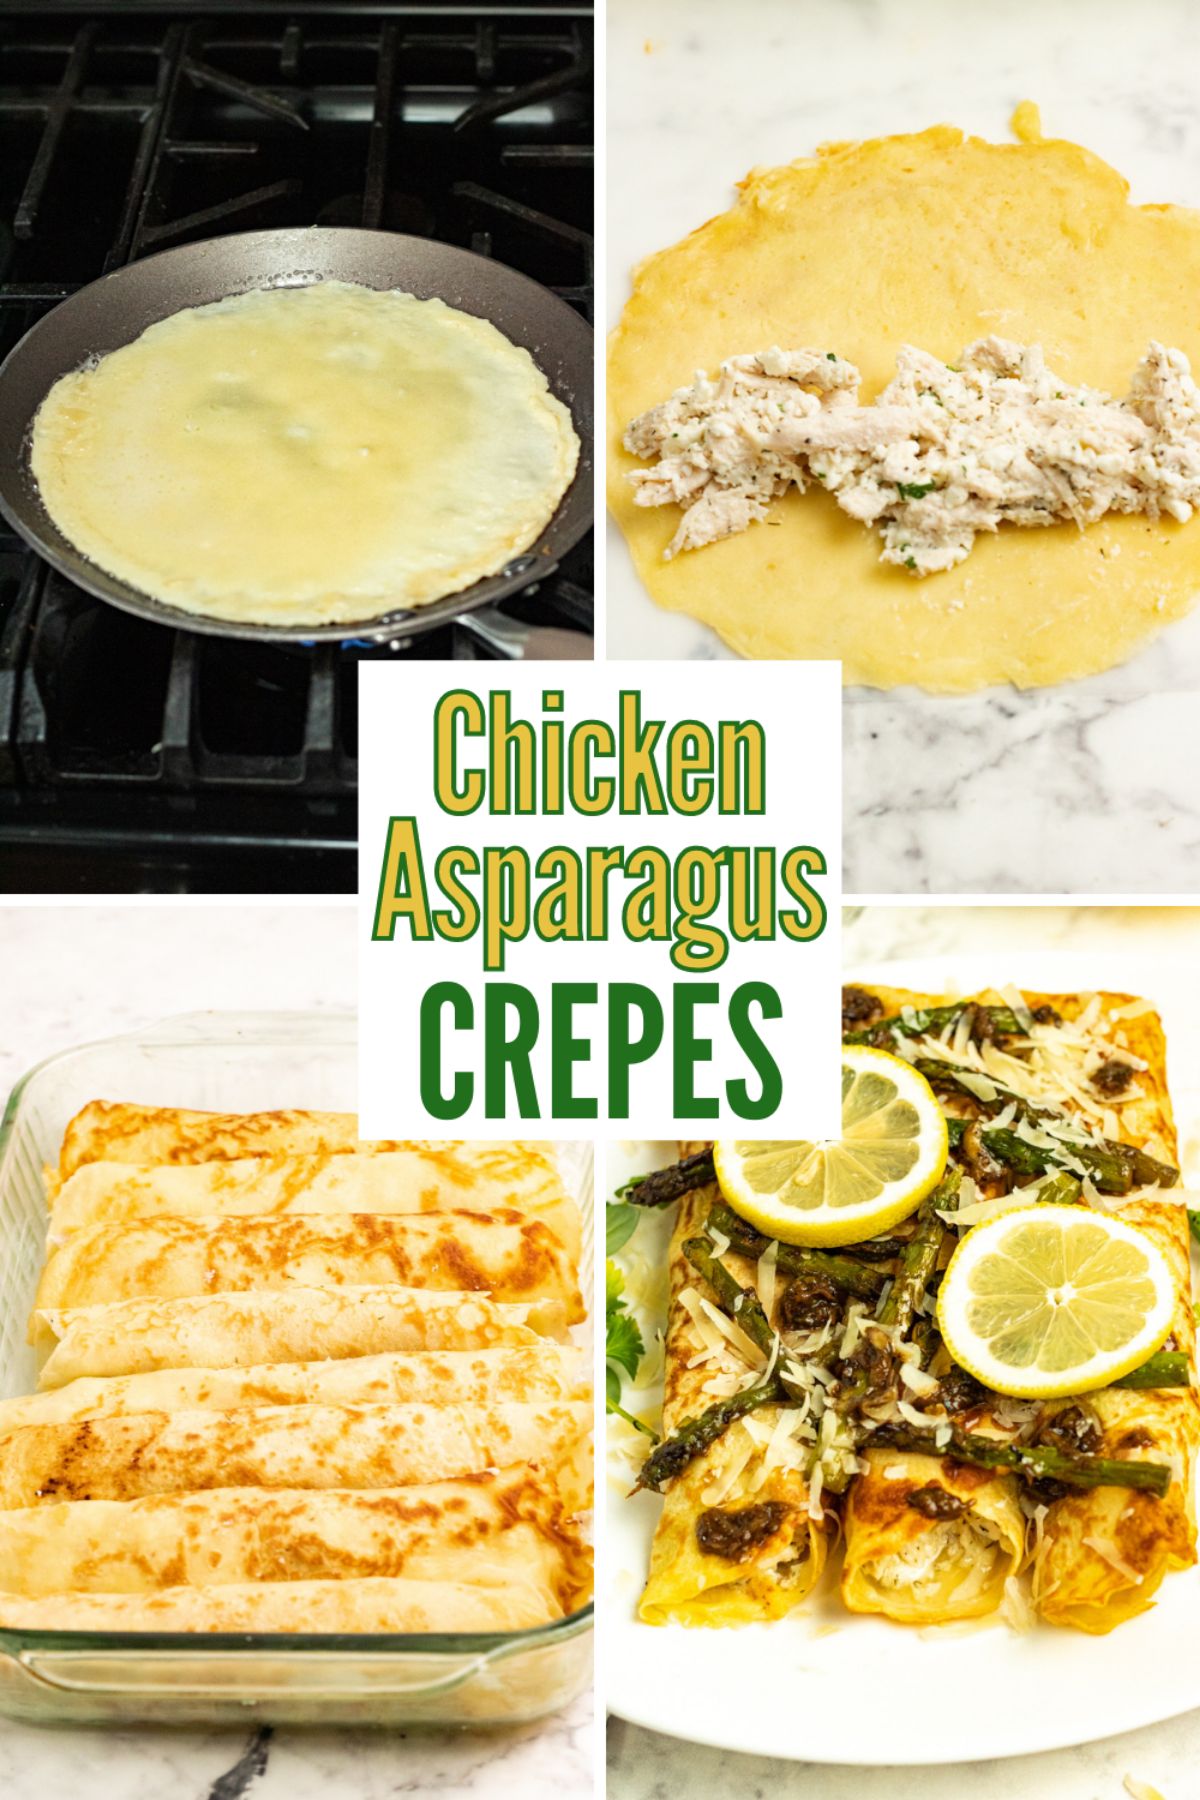 These Chicken Asparagus Crepes are light, fluffy, and perfectly filling. They make the perfect breakfast or brunch dish! #chickenasparaguscrepes #chicken #asparaguscrepes #crepesrecipe via @wondermomwannab